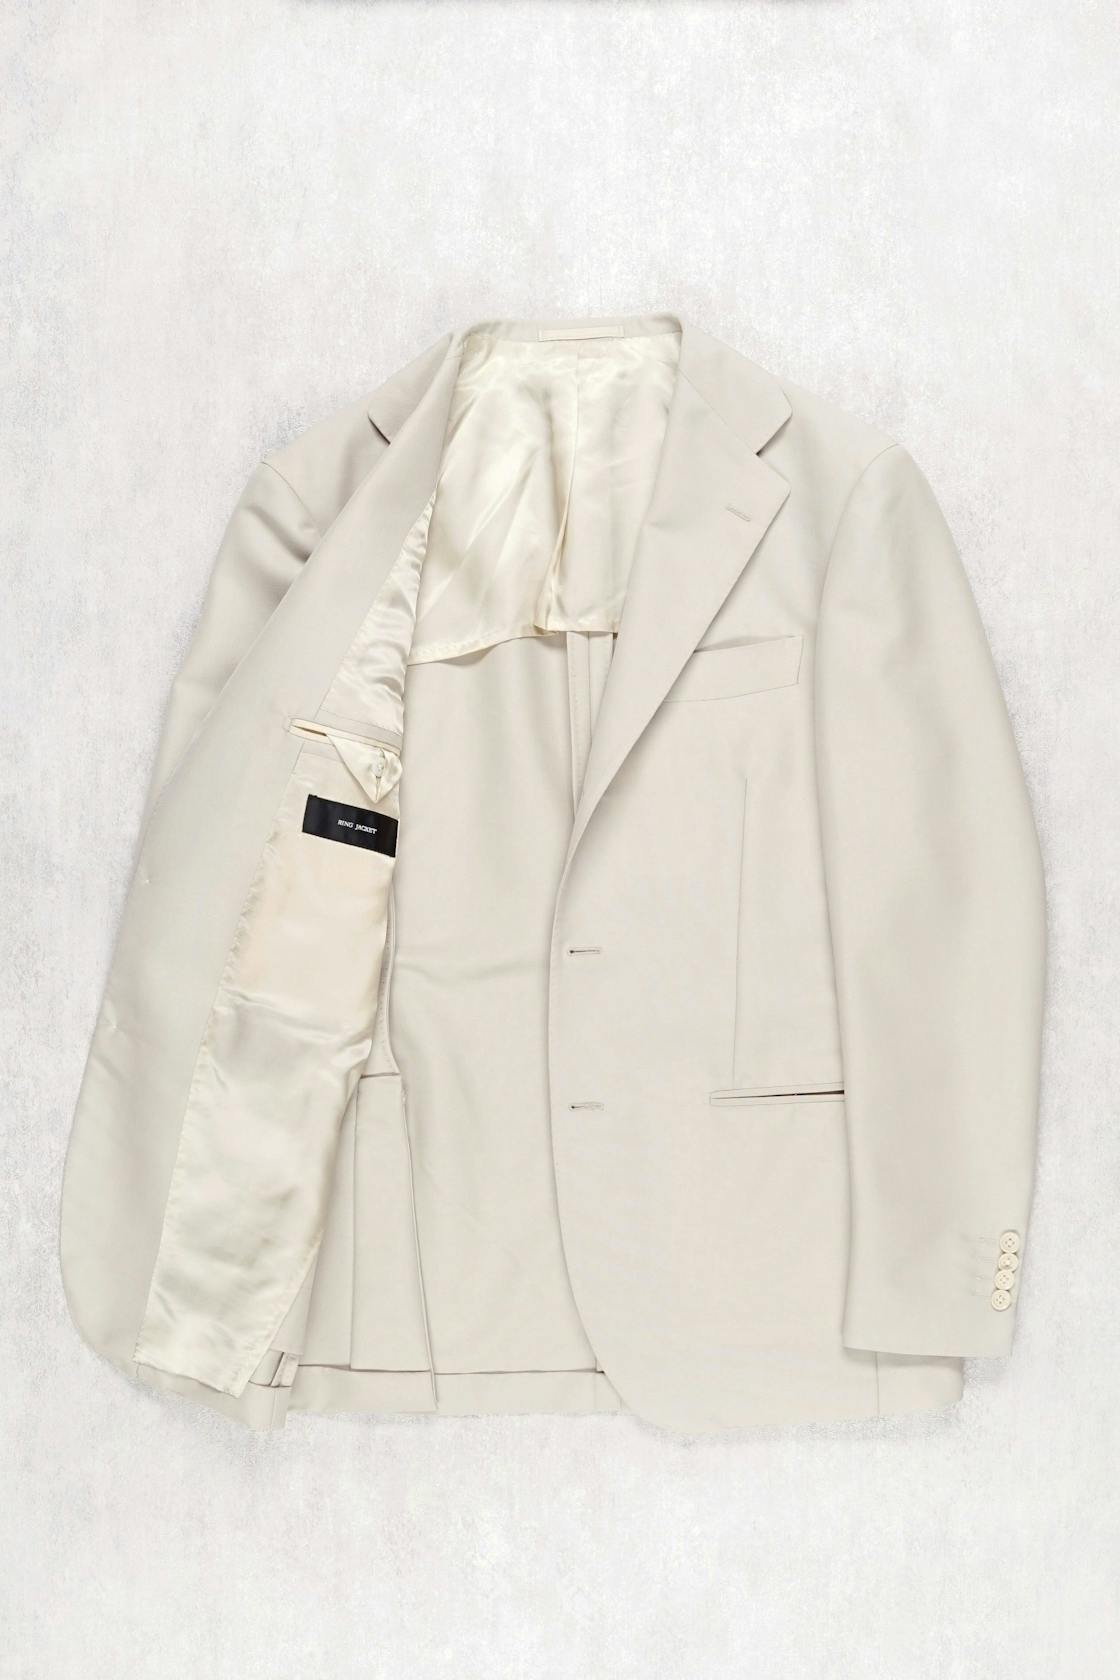 Ring Jacket 269 Cream Wool Canvas Suit